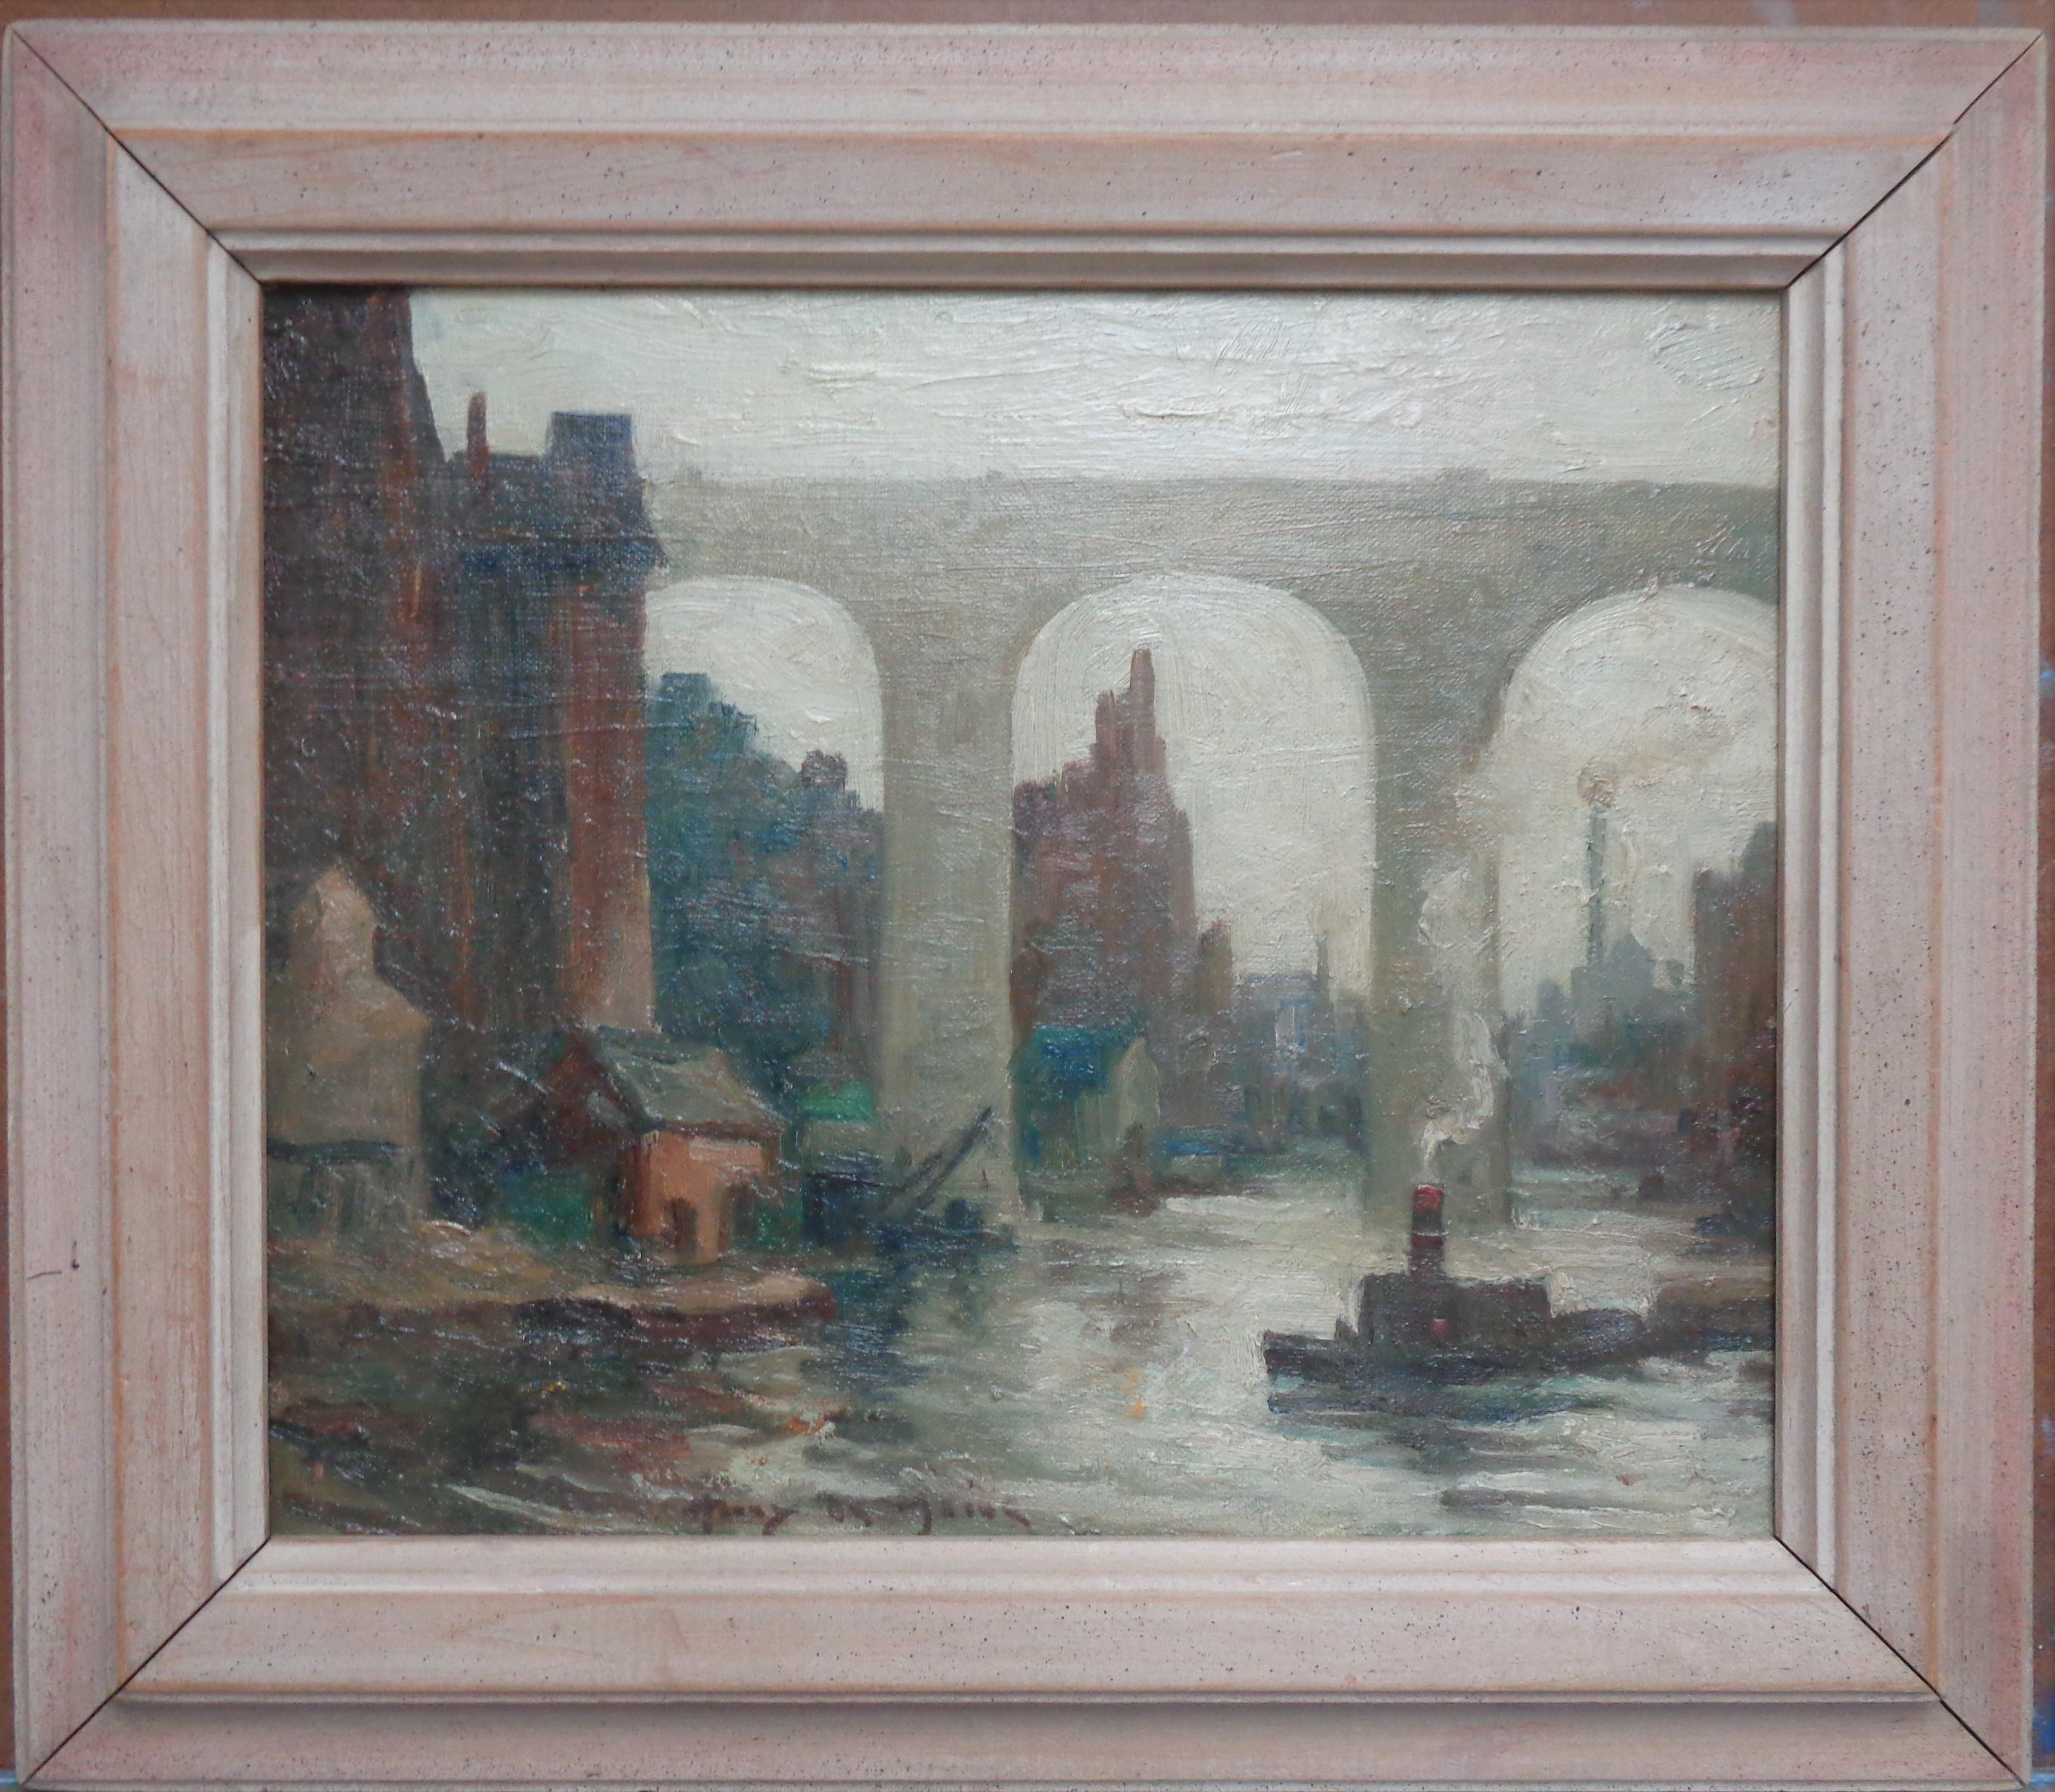 The High Bridge oil on panel by Harry DeMaine. Image  is 12 x 14 and 13.5 x 15.75 framed. partial Salmagundi label on reverse.
Harry DeMaine was born in Liverpool, England. He took his first formal art instruction at the Liverpool City Art School,